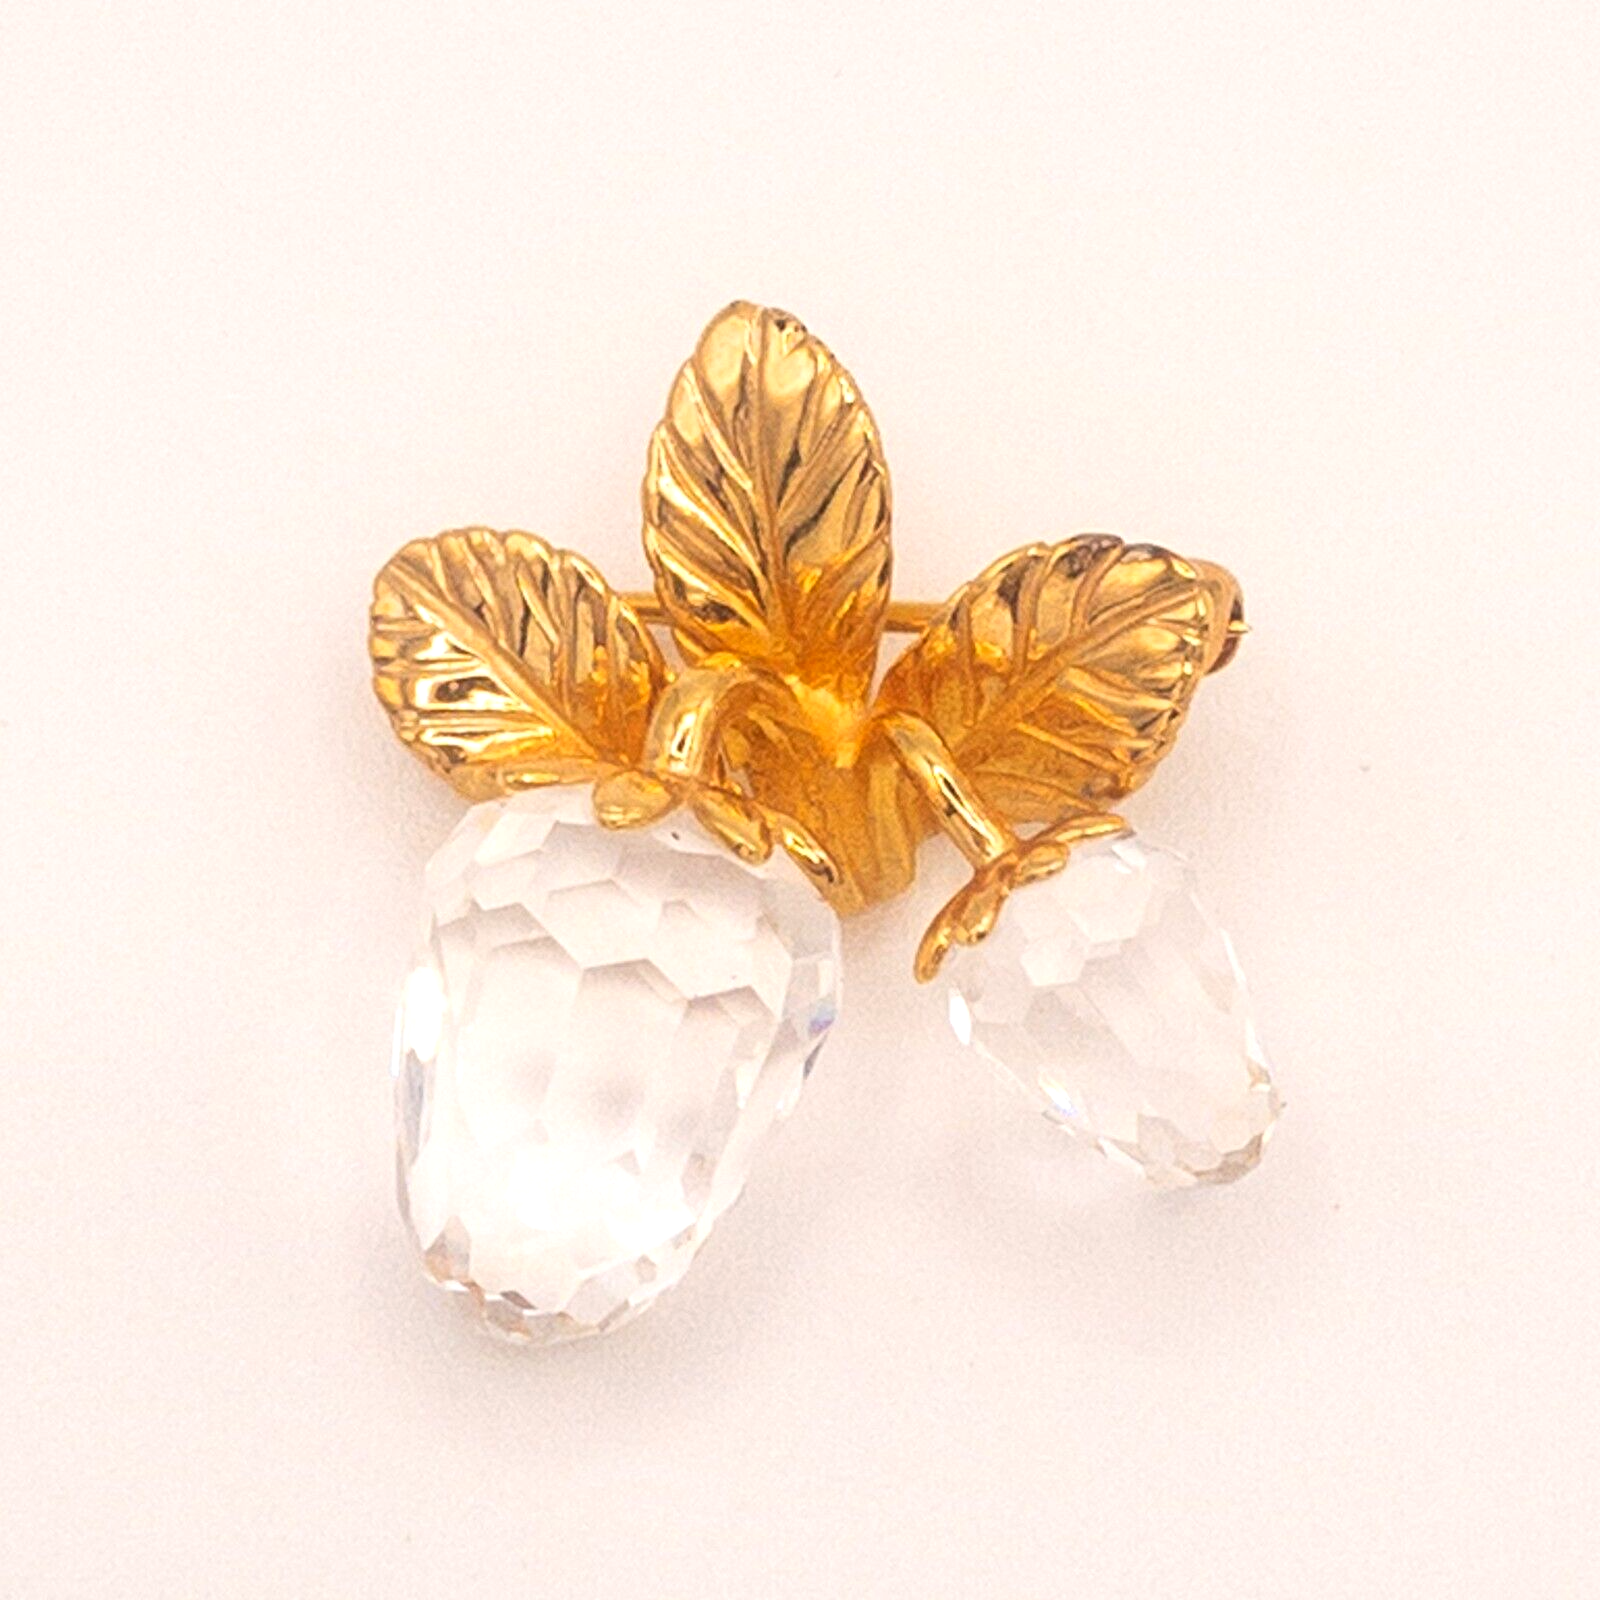 Strawberry Brooch Pin Swarovski Gold Tone Crystal Memories Accessories With Box - $48.33